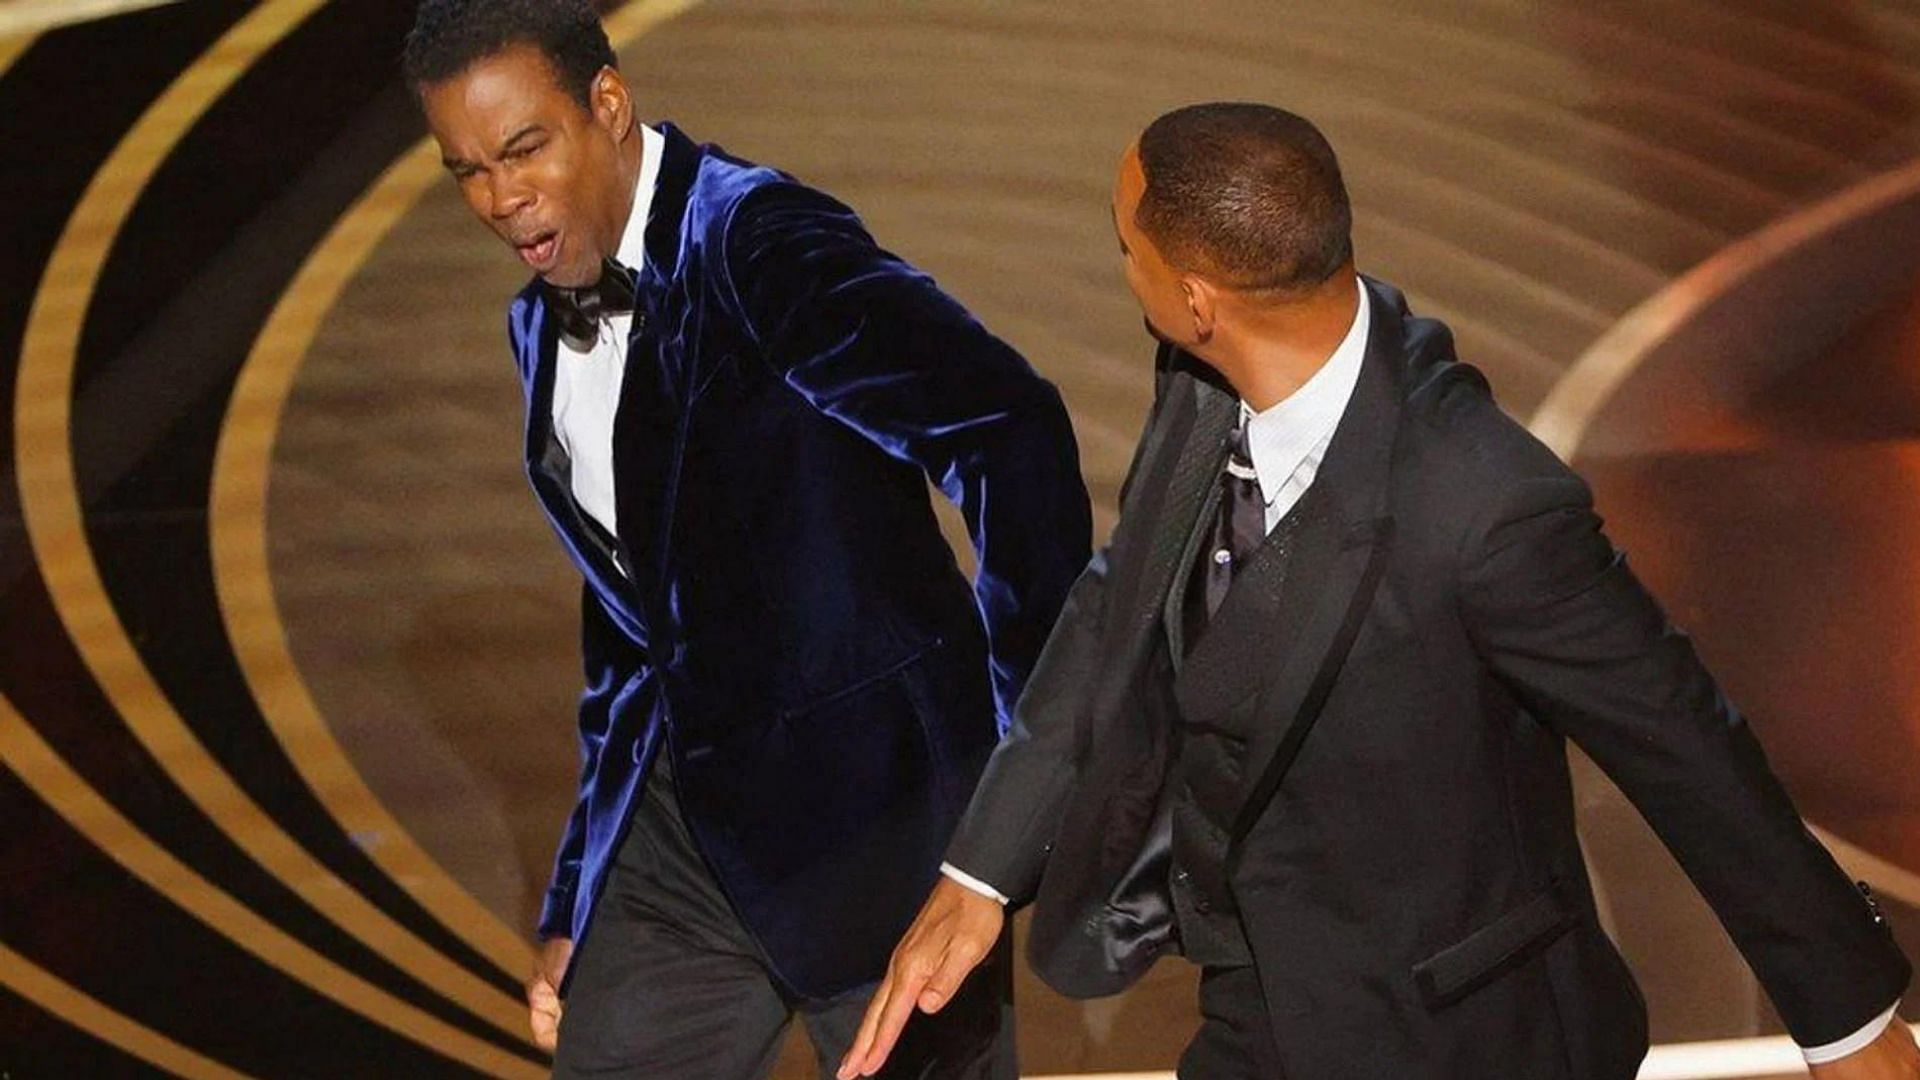 Will Smith and Chris Rock get into an altercation during Oscars live ceremony (Image via Getty Images)